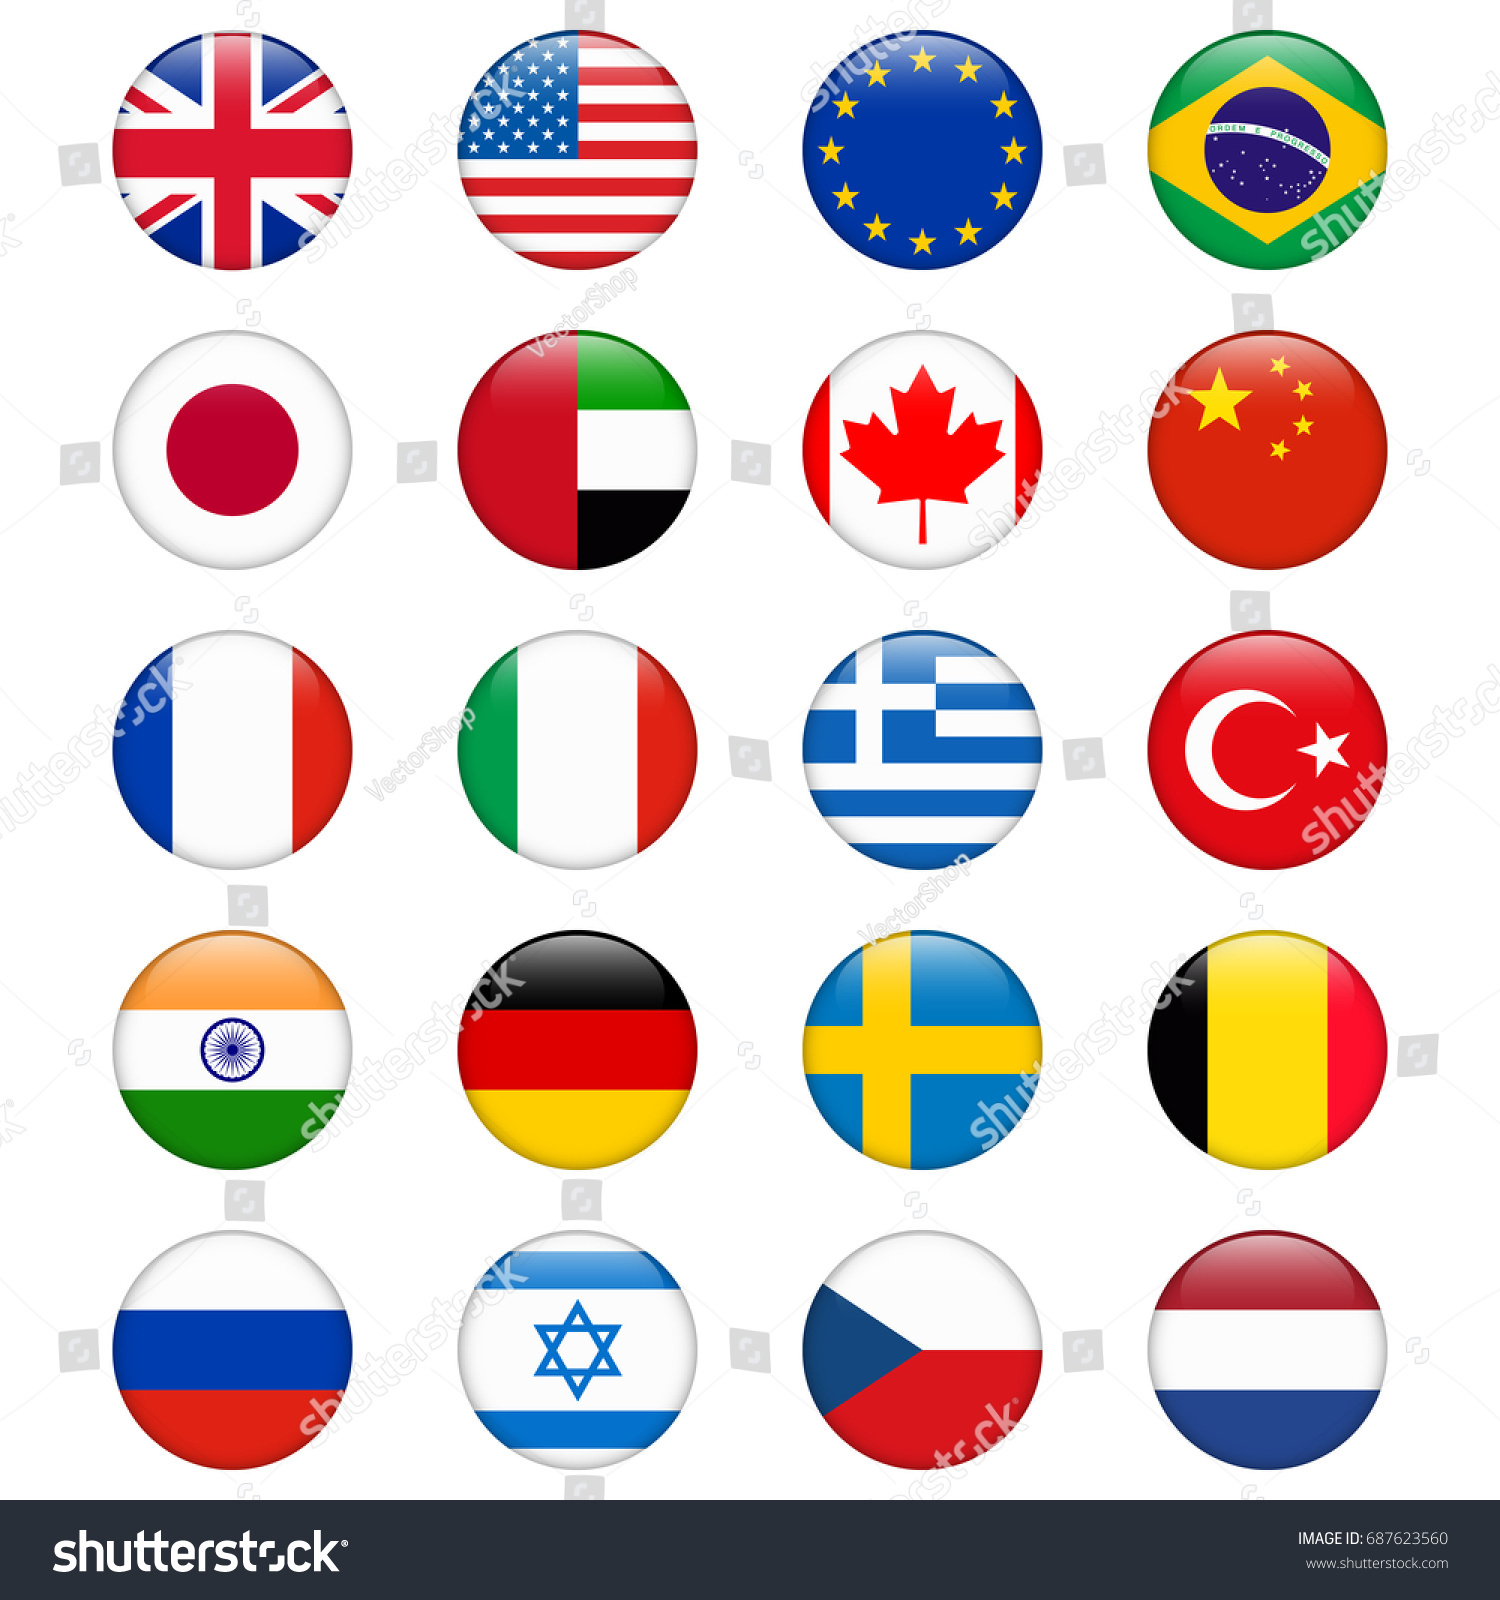 Set of popular country flags. Glossy round icon set. #687623560